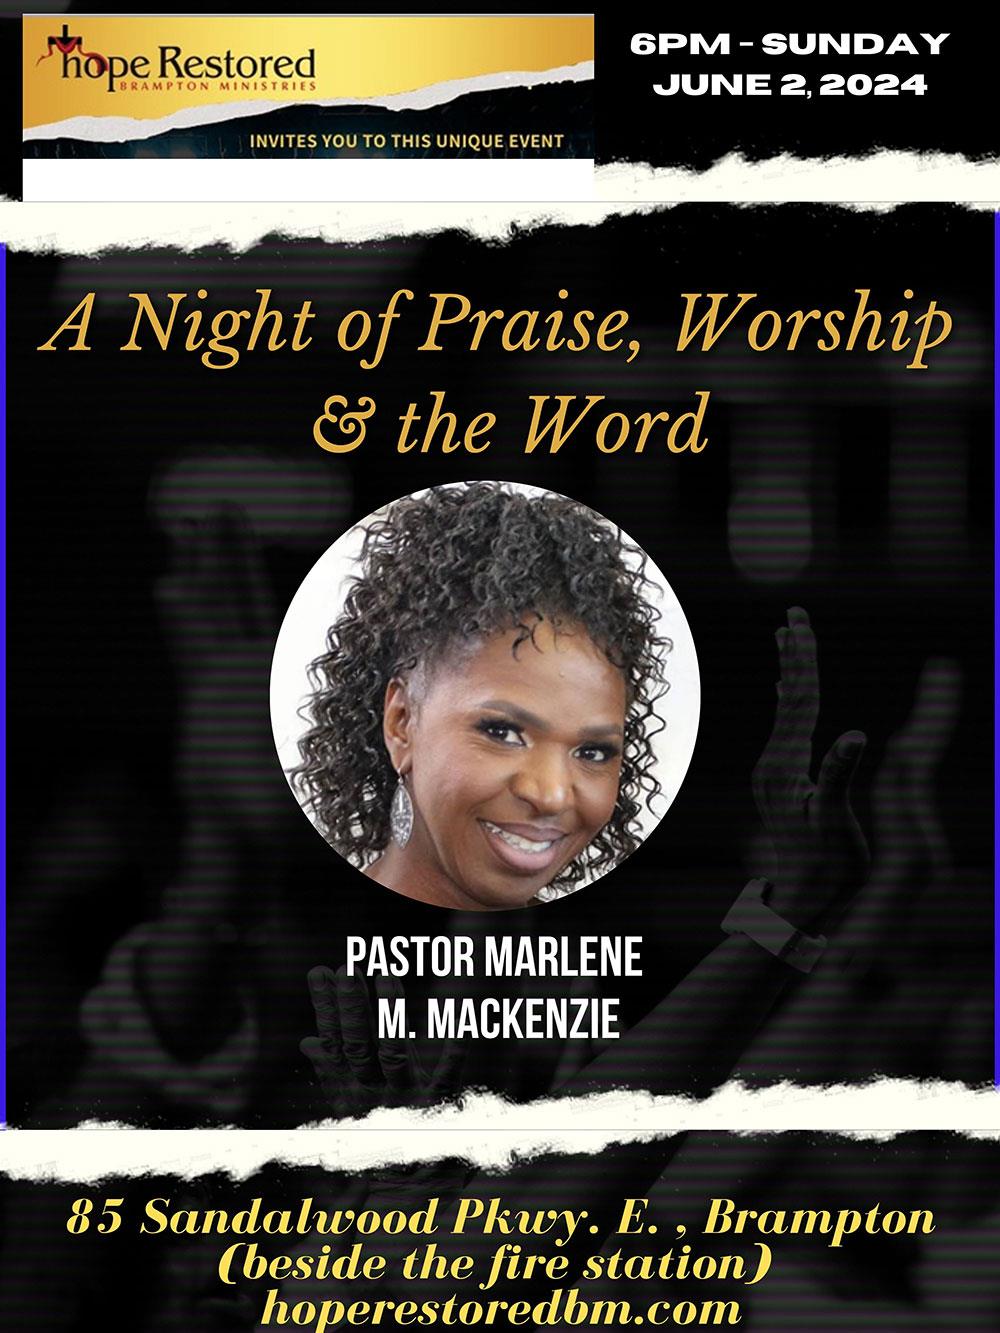 A night of praise, worship and the Word